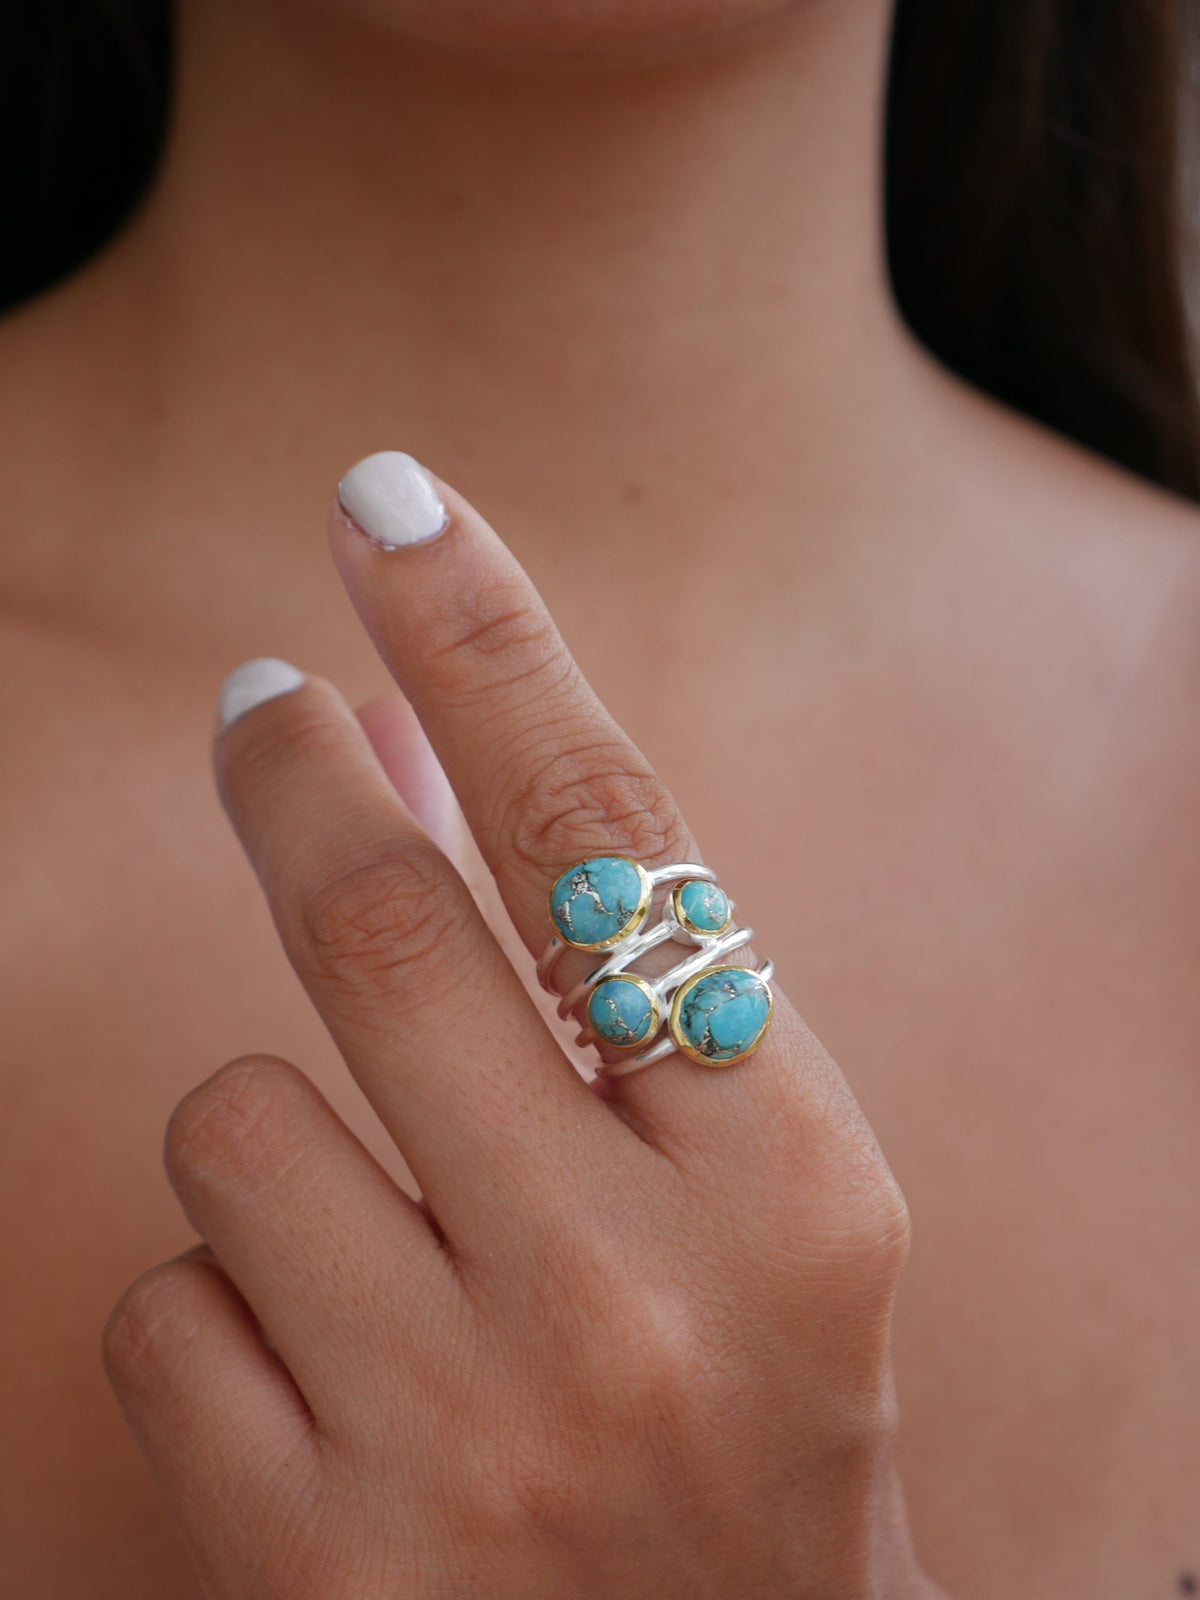 rings, silver, turquoise rings, jewelry, accessories, fashion jewelry, trending on instagram, trending on tiktok, fine jewelry, statement rings, statement rings, natural stone rings, handmade jewelry, designe rings, luxury rings, fine jewelry, cool rings, casual rings, rings that wont turn green with water, nice jewelry, gift ideas, anniversary gifts, graduation gifts, birthday gifts, Kesley Jewelry,  , rings for the pointer finger, casual jewelry, popular accessories, turquoise jewelry 